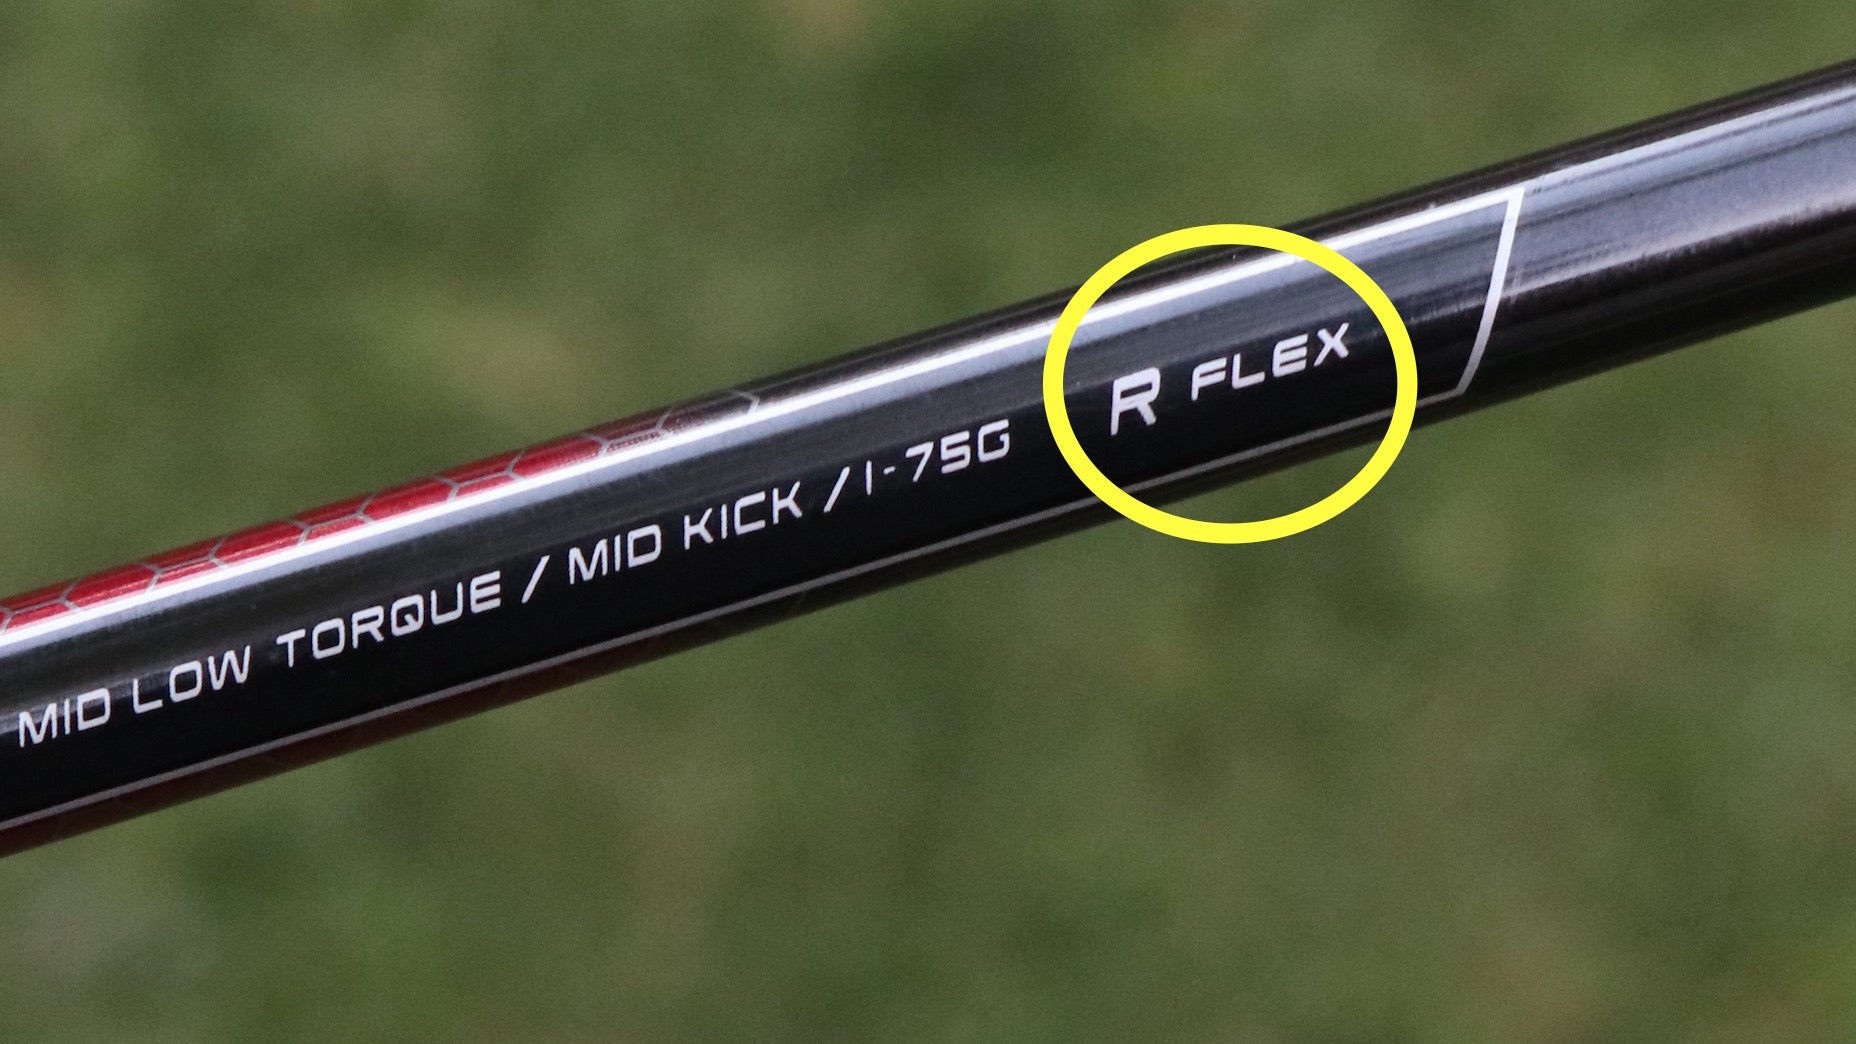 Shaft flex letters are essentially irrelevant, according to an expert